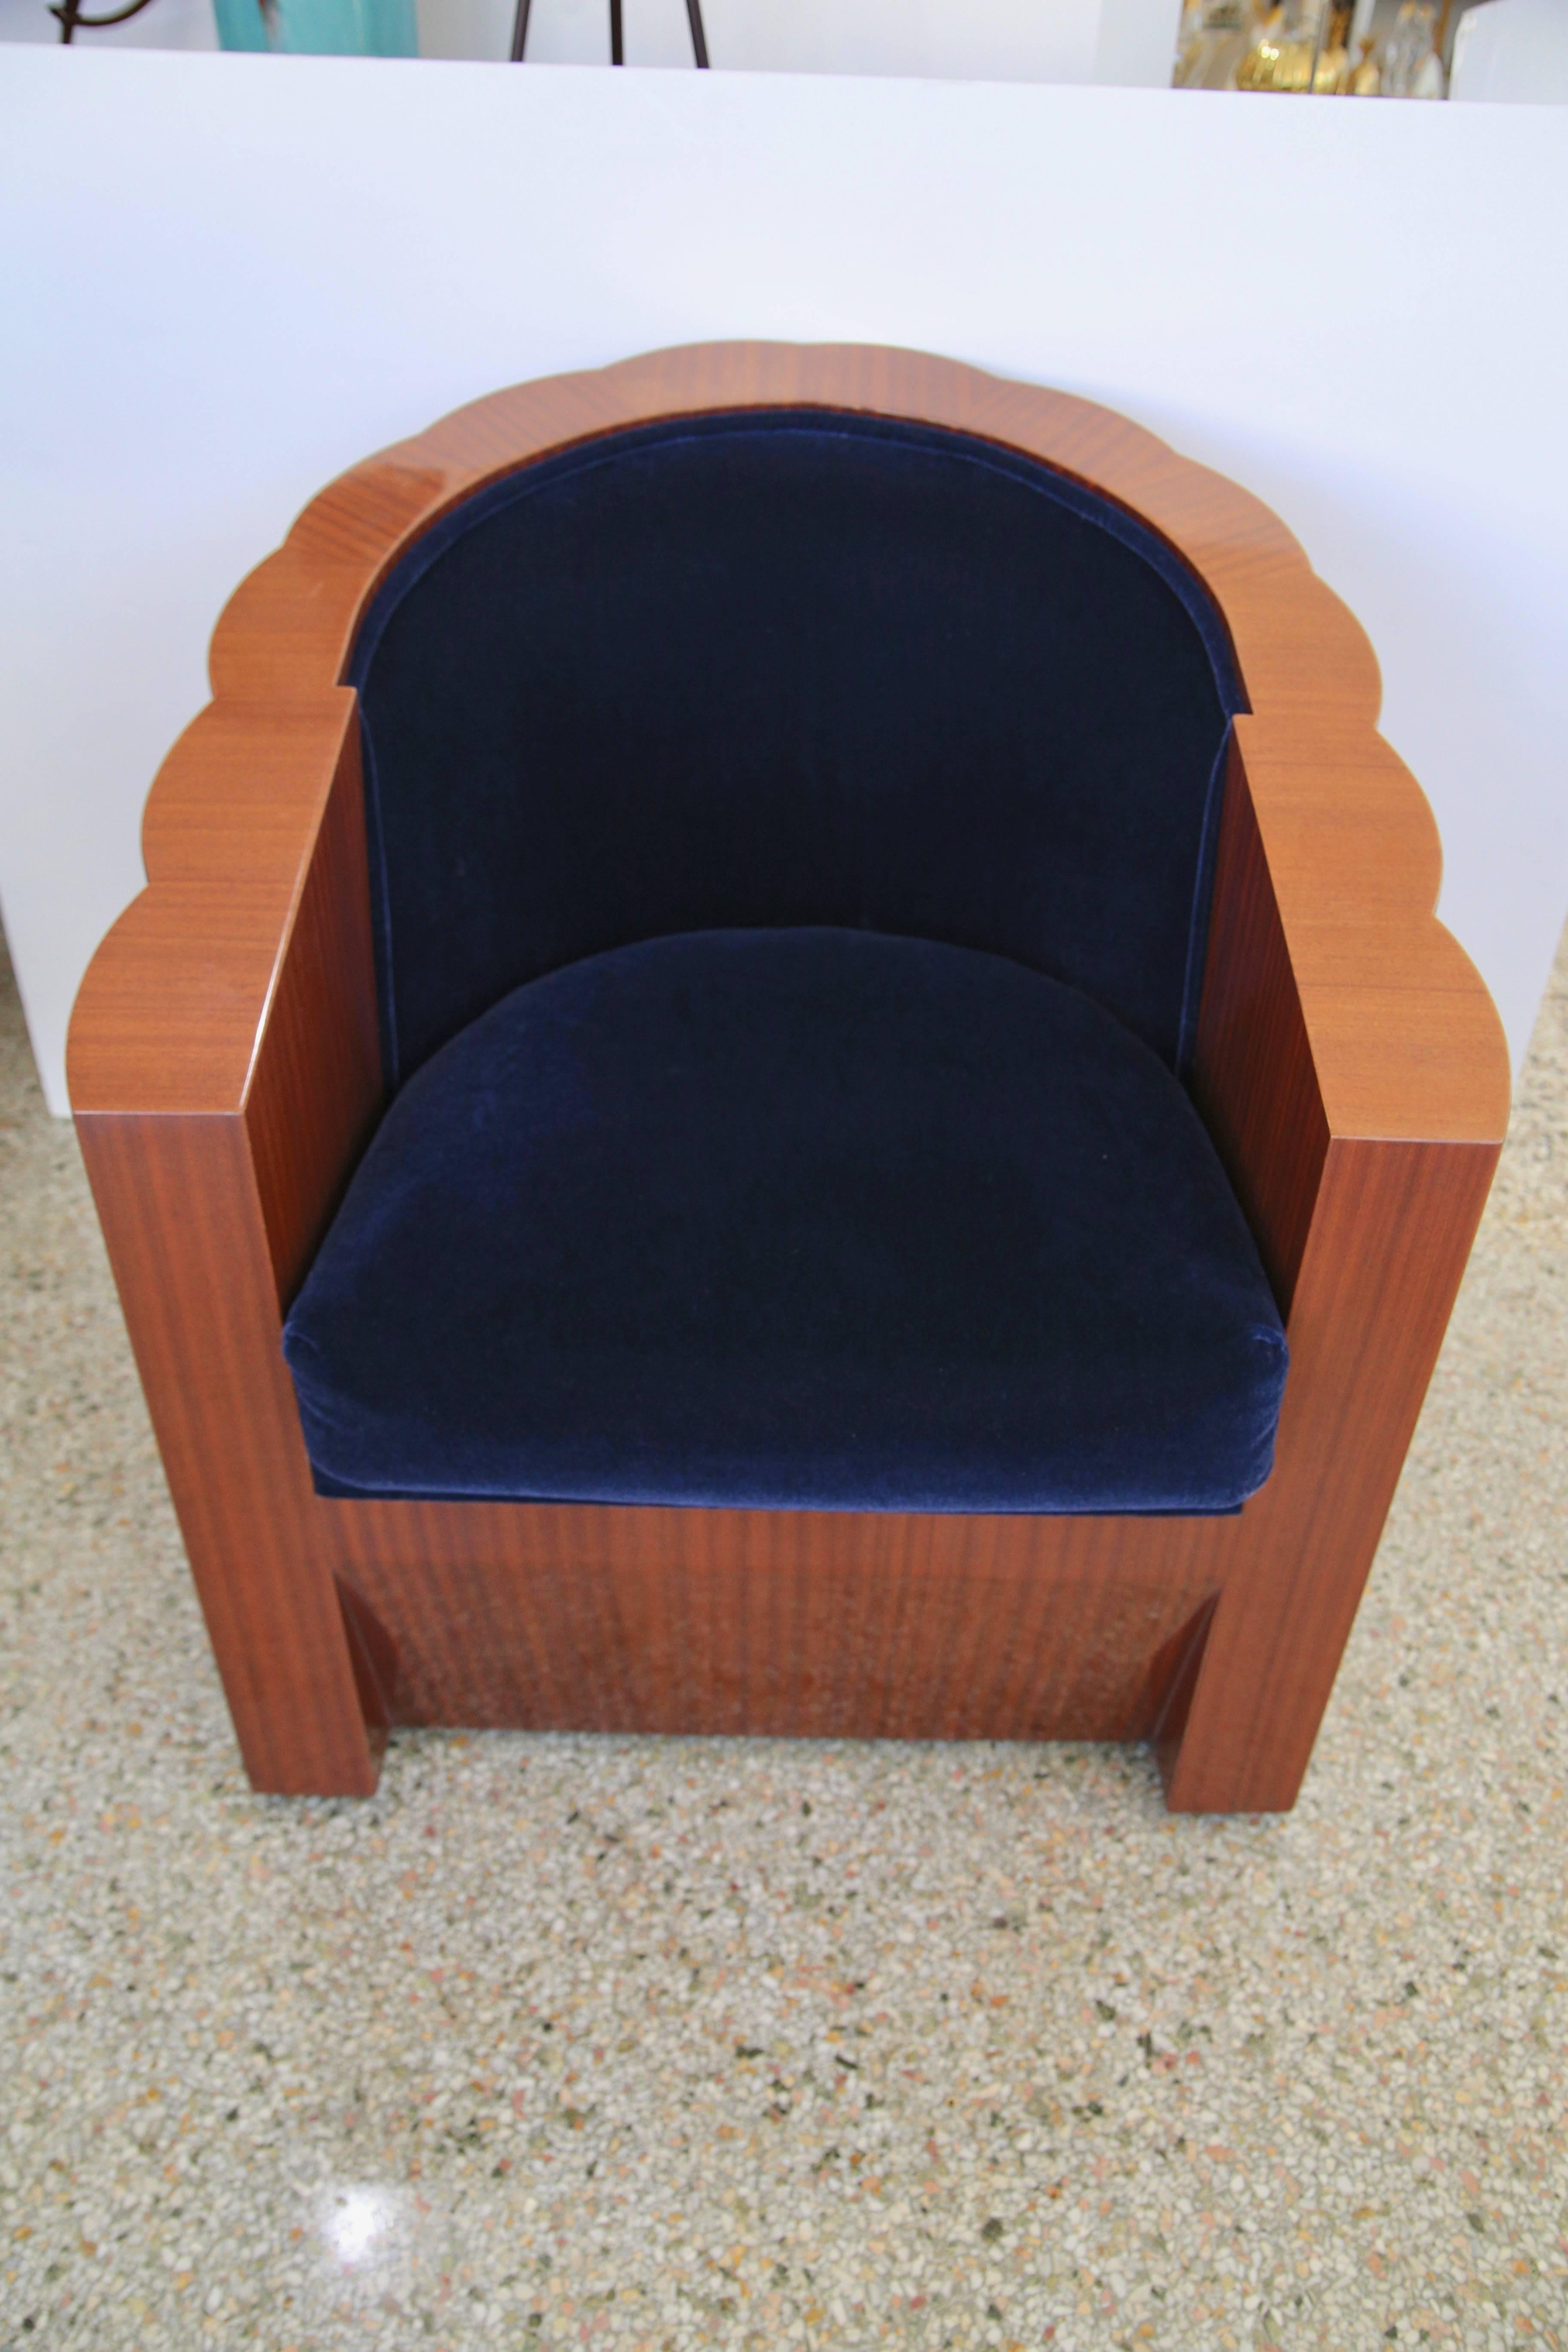 This large scale Art Deco inspired club chair will make a statement with its form and use of materials. The ribbon mahogany frames the deep blue mohair upholstery beautifully.  

Note: Seat cushion is removable.

Note: The piece is on casters and